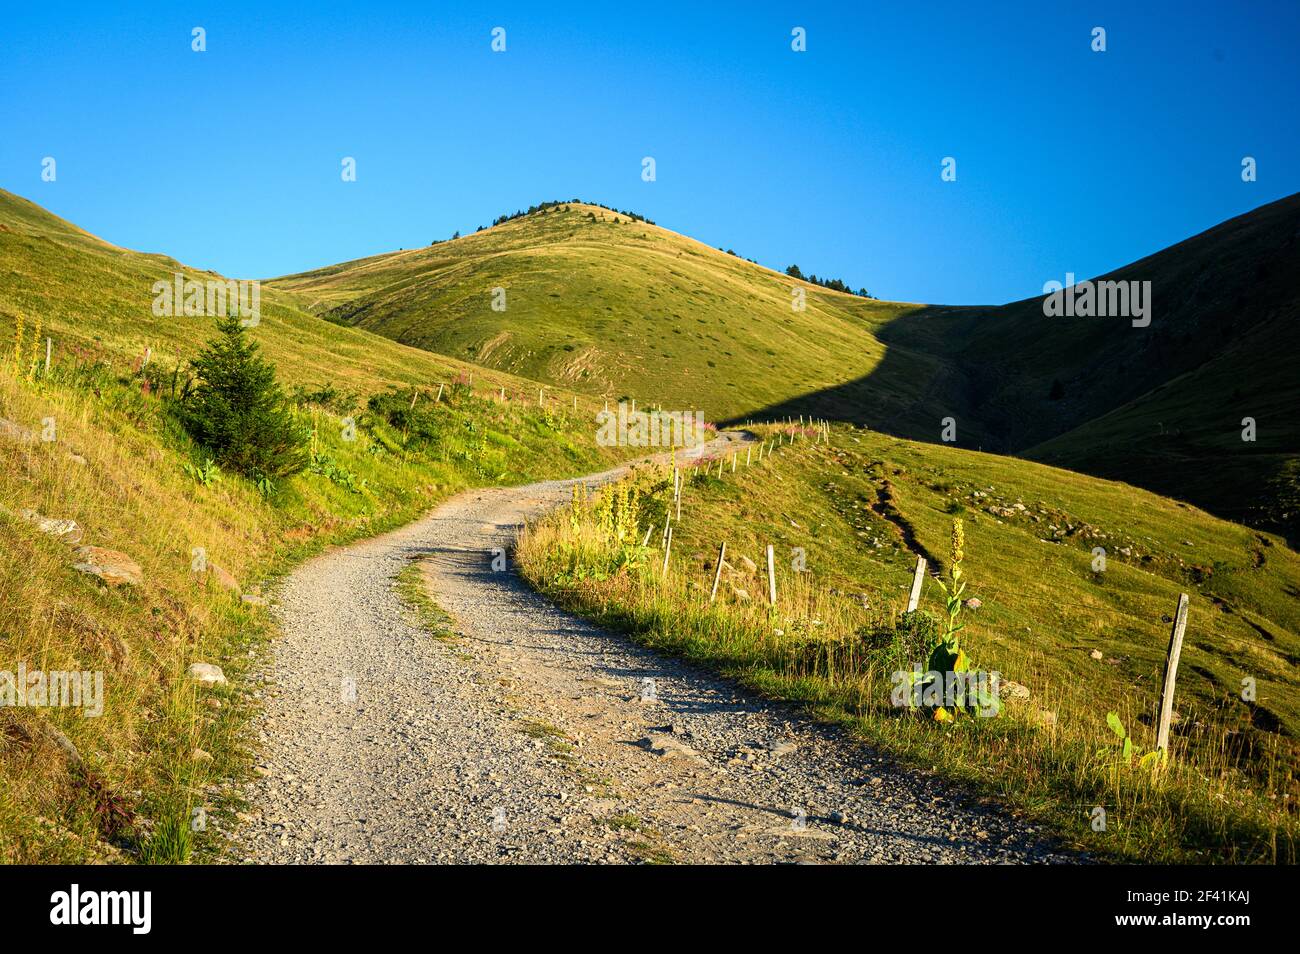 Stone path ascending up a grassy hill on a beautiful sunny day Stock Photo